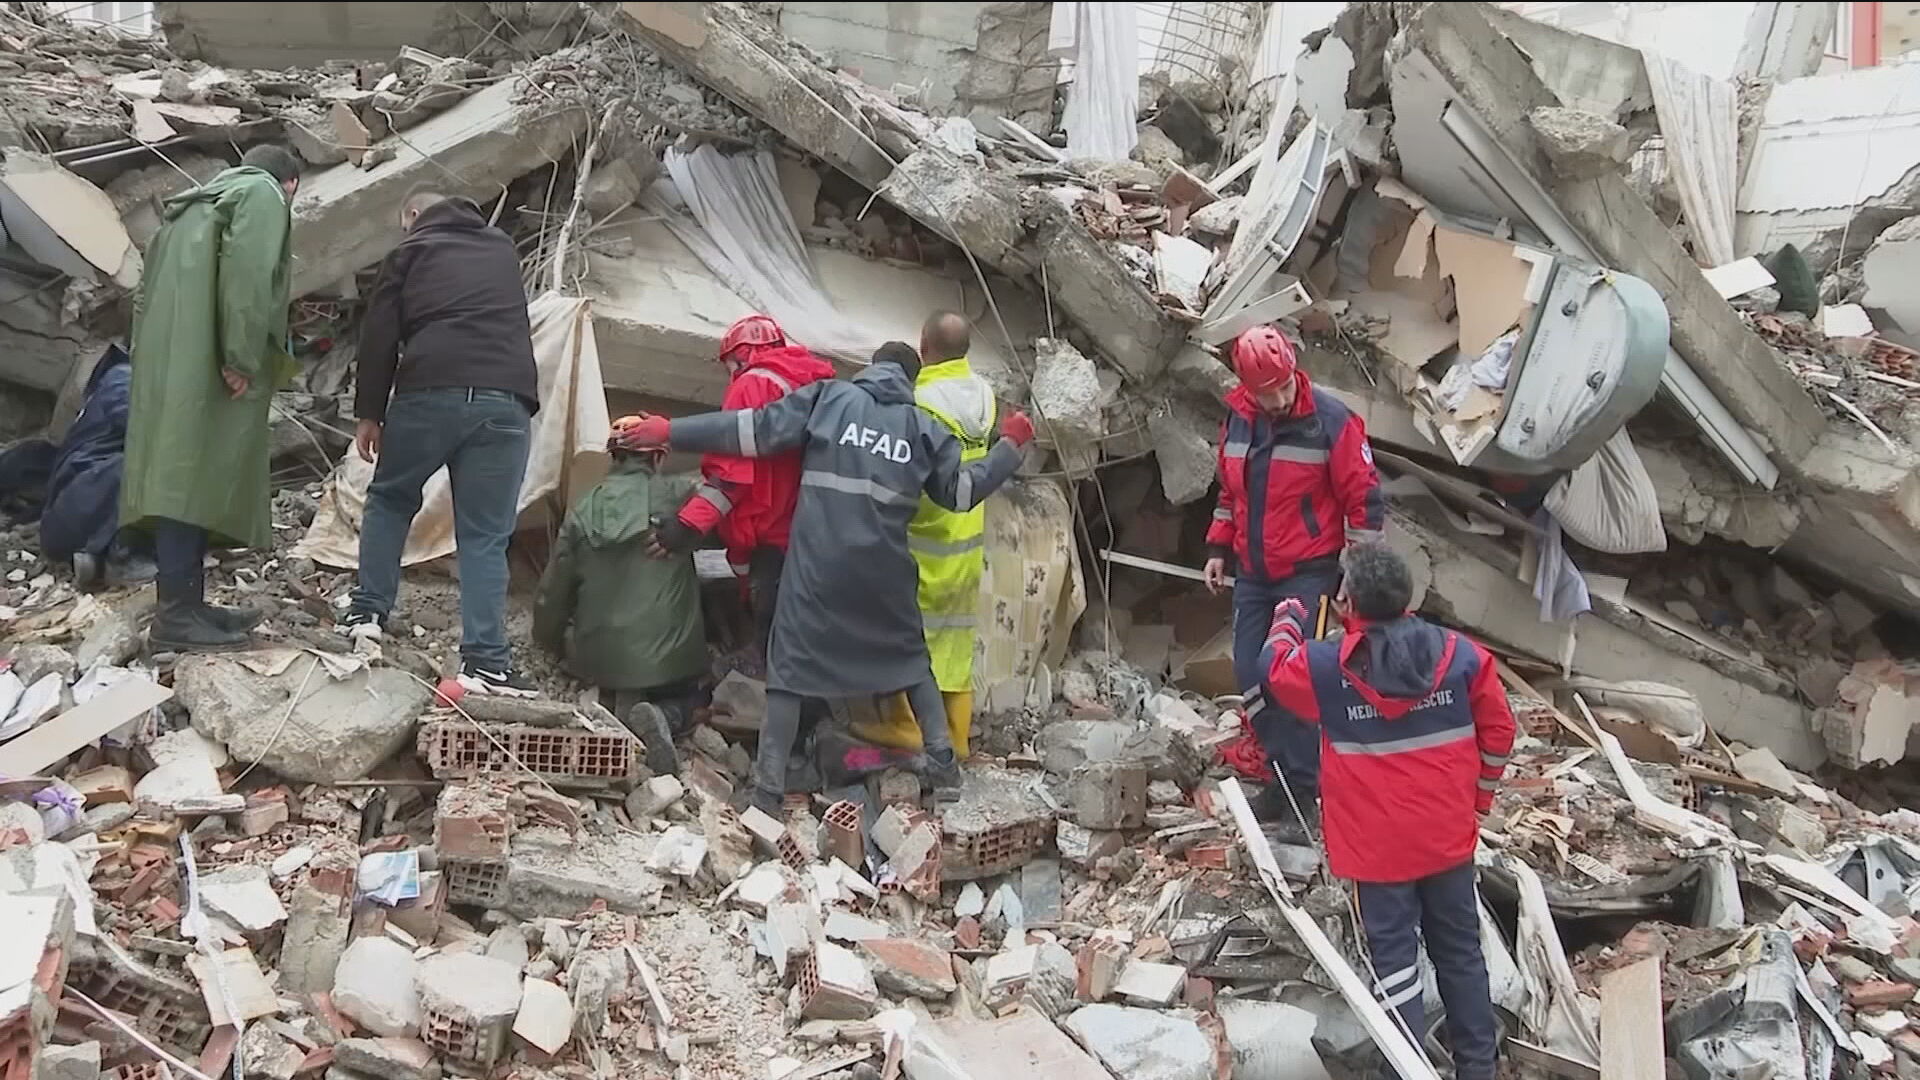 Rescuers have been searching desperately through the rubble.